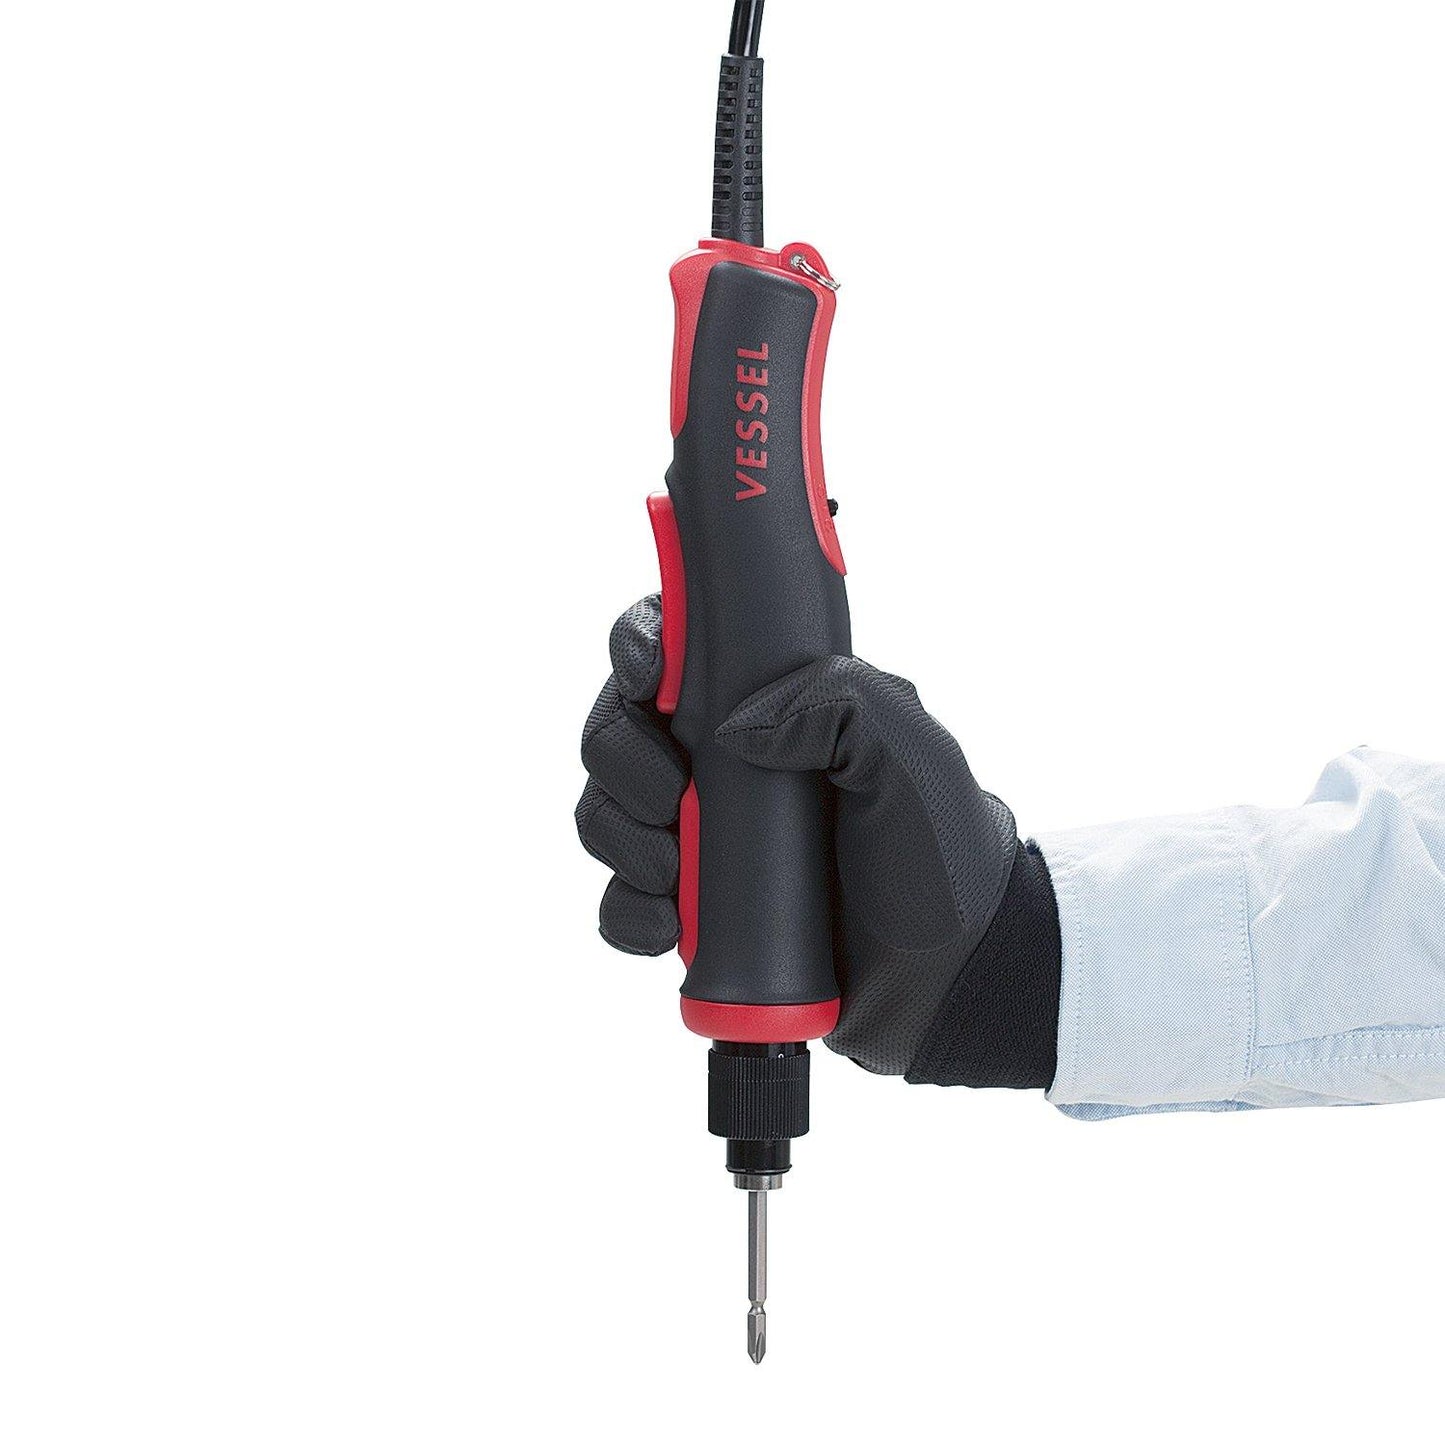 Vessel VE-4000 Electric Screwdriver lever type in use